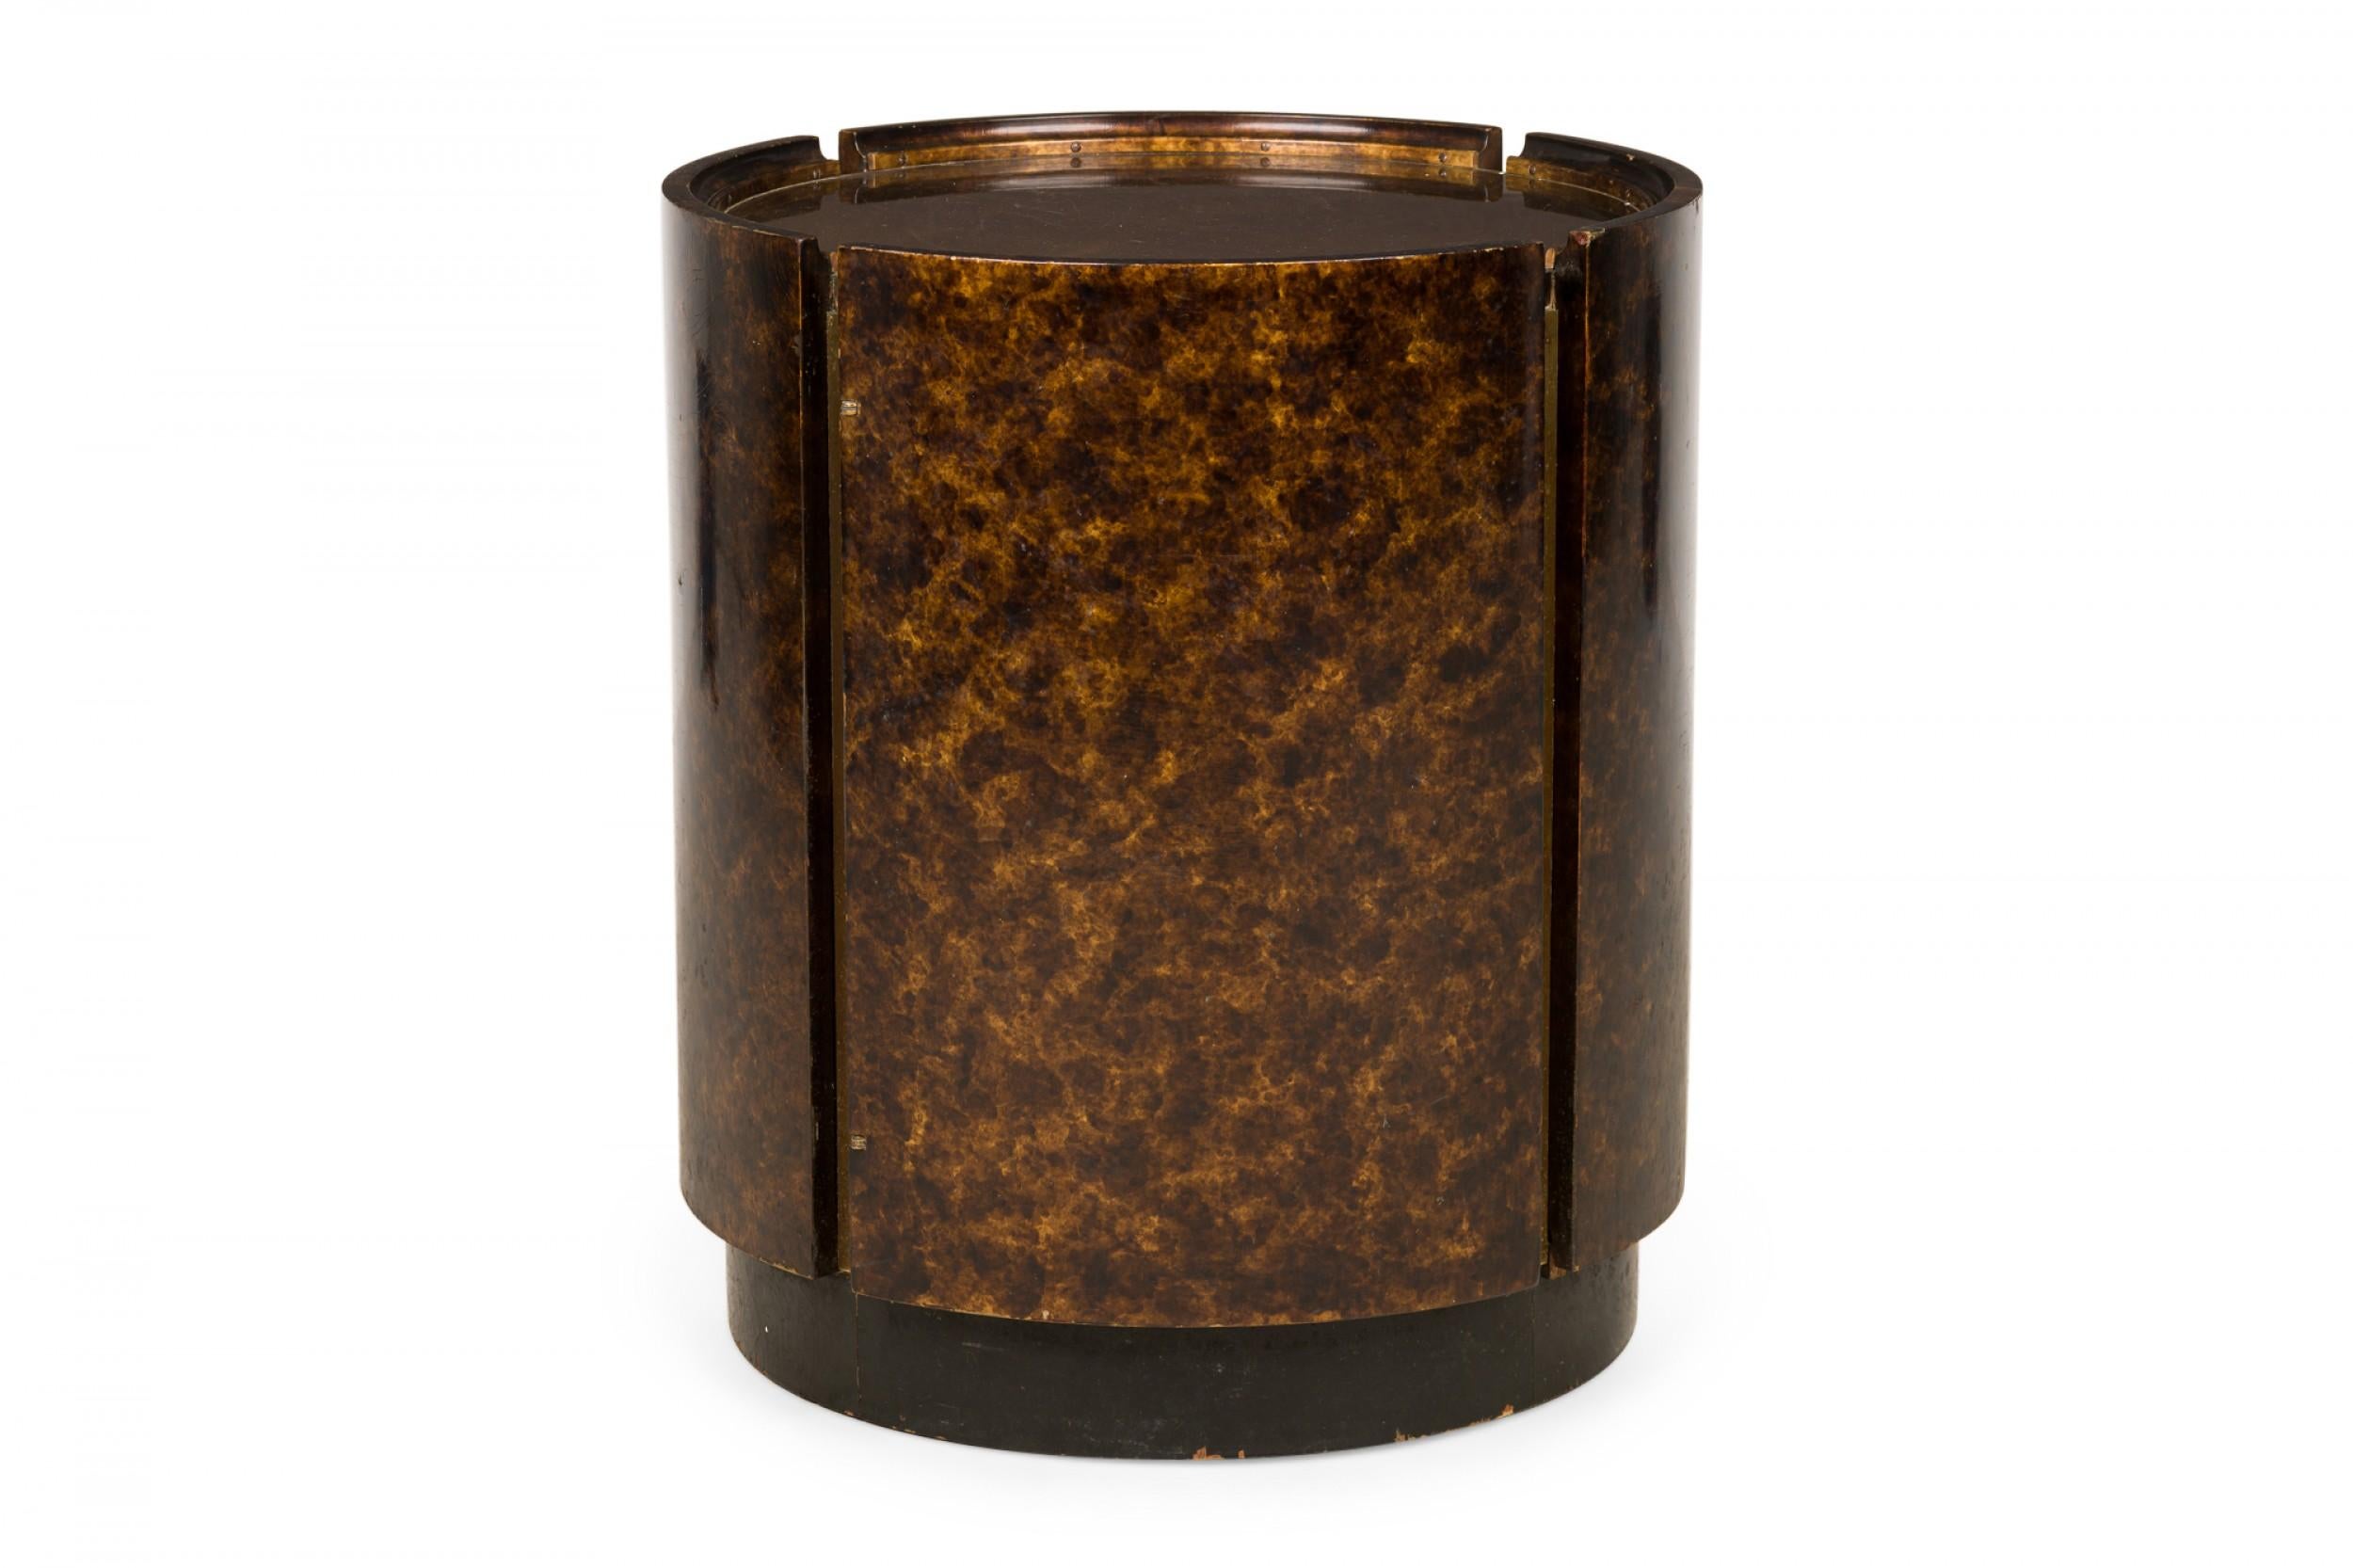 PAIR of American mid-century drum-form end / side tables with four oil drop lacquer panels around the side with narrow cutouts containing brass strips, resting on a circular pedestal bases. (MASTERCRAFT)(PRICED AS PAIR)